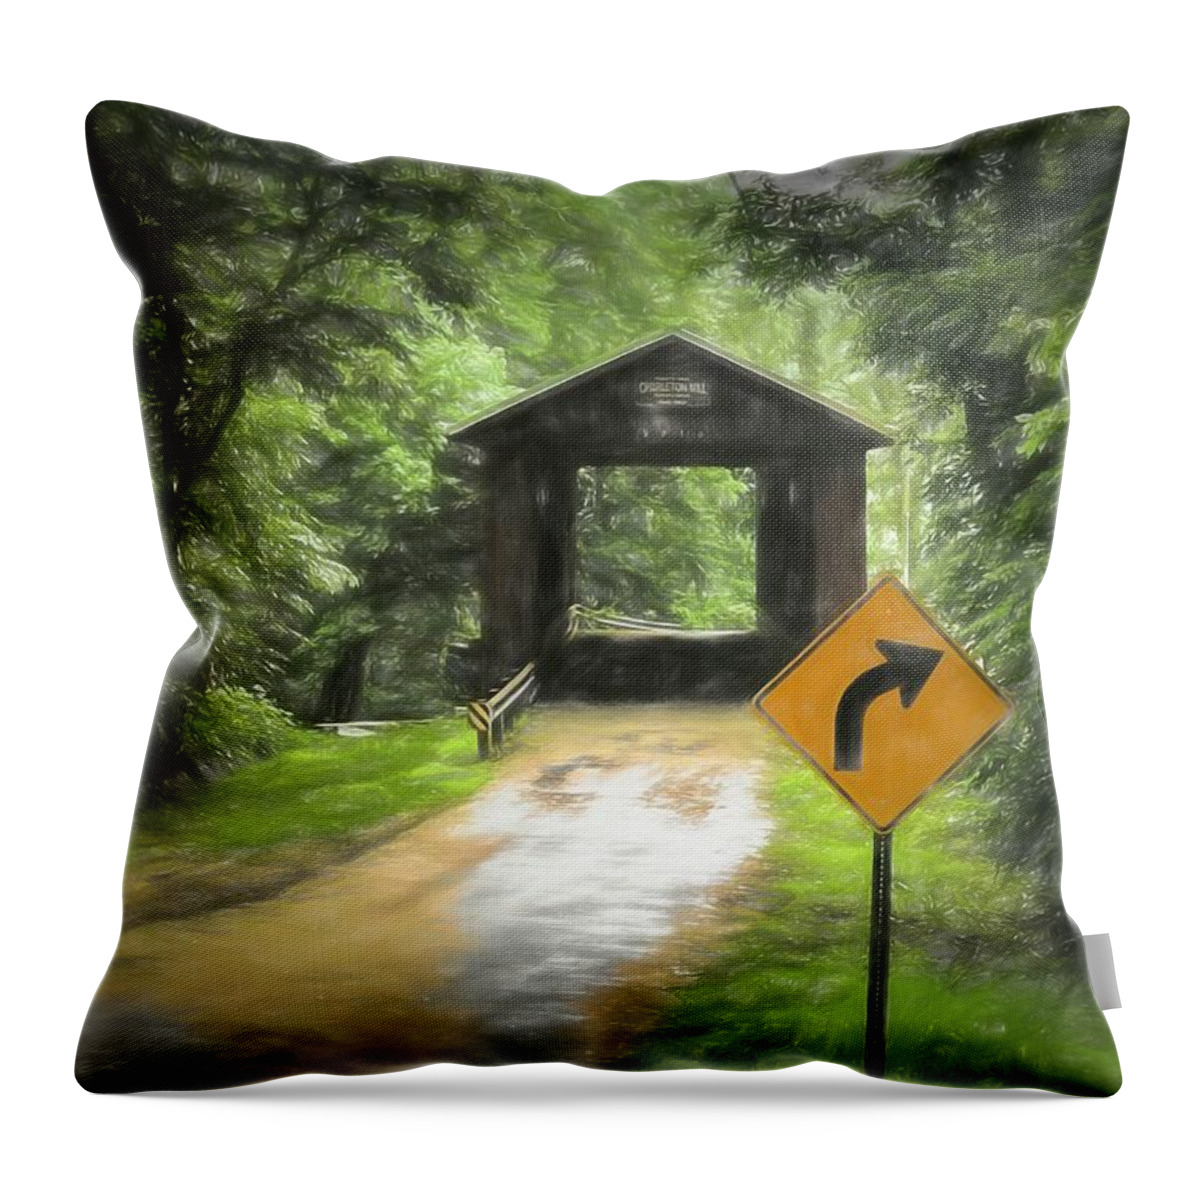  Throw Pillow featuring the photograph Turn Right by Jack Wilson